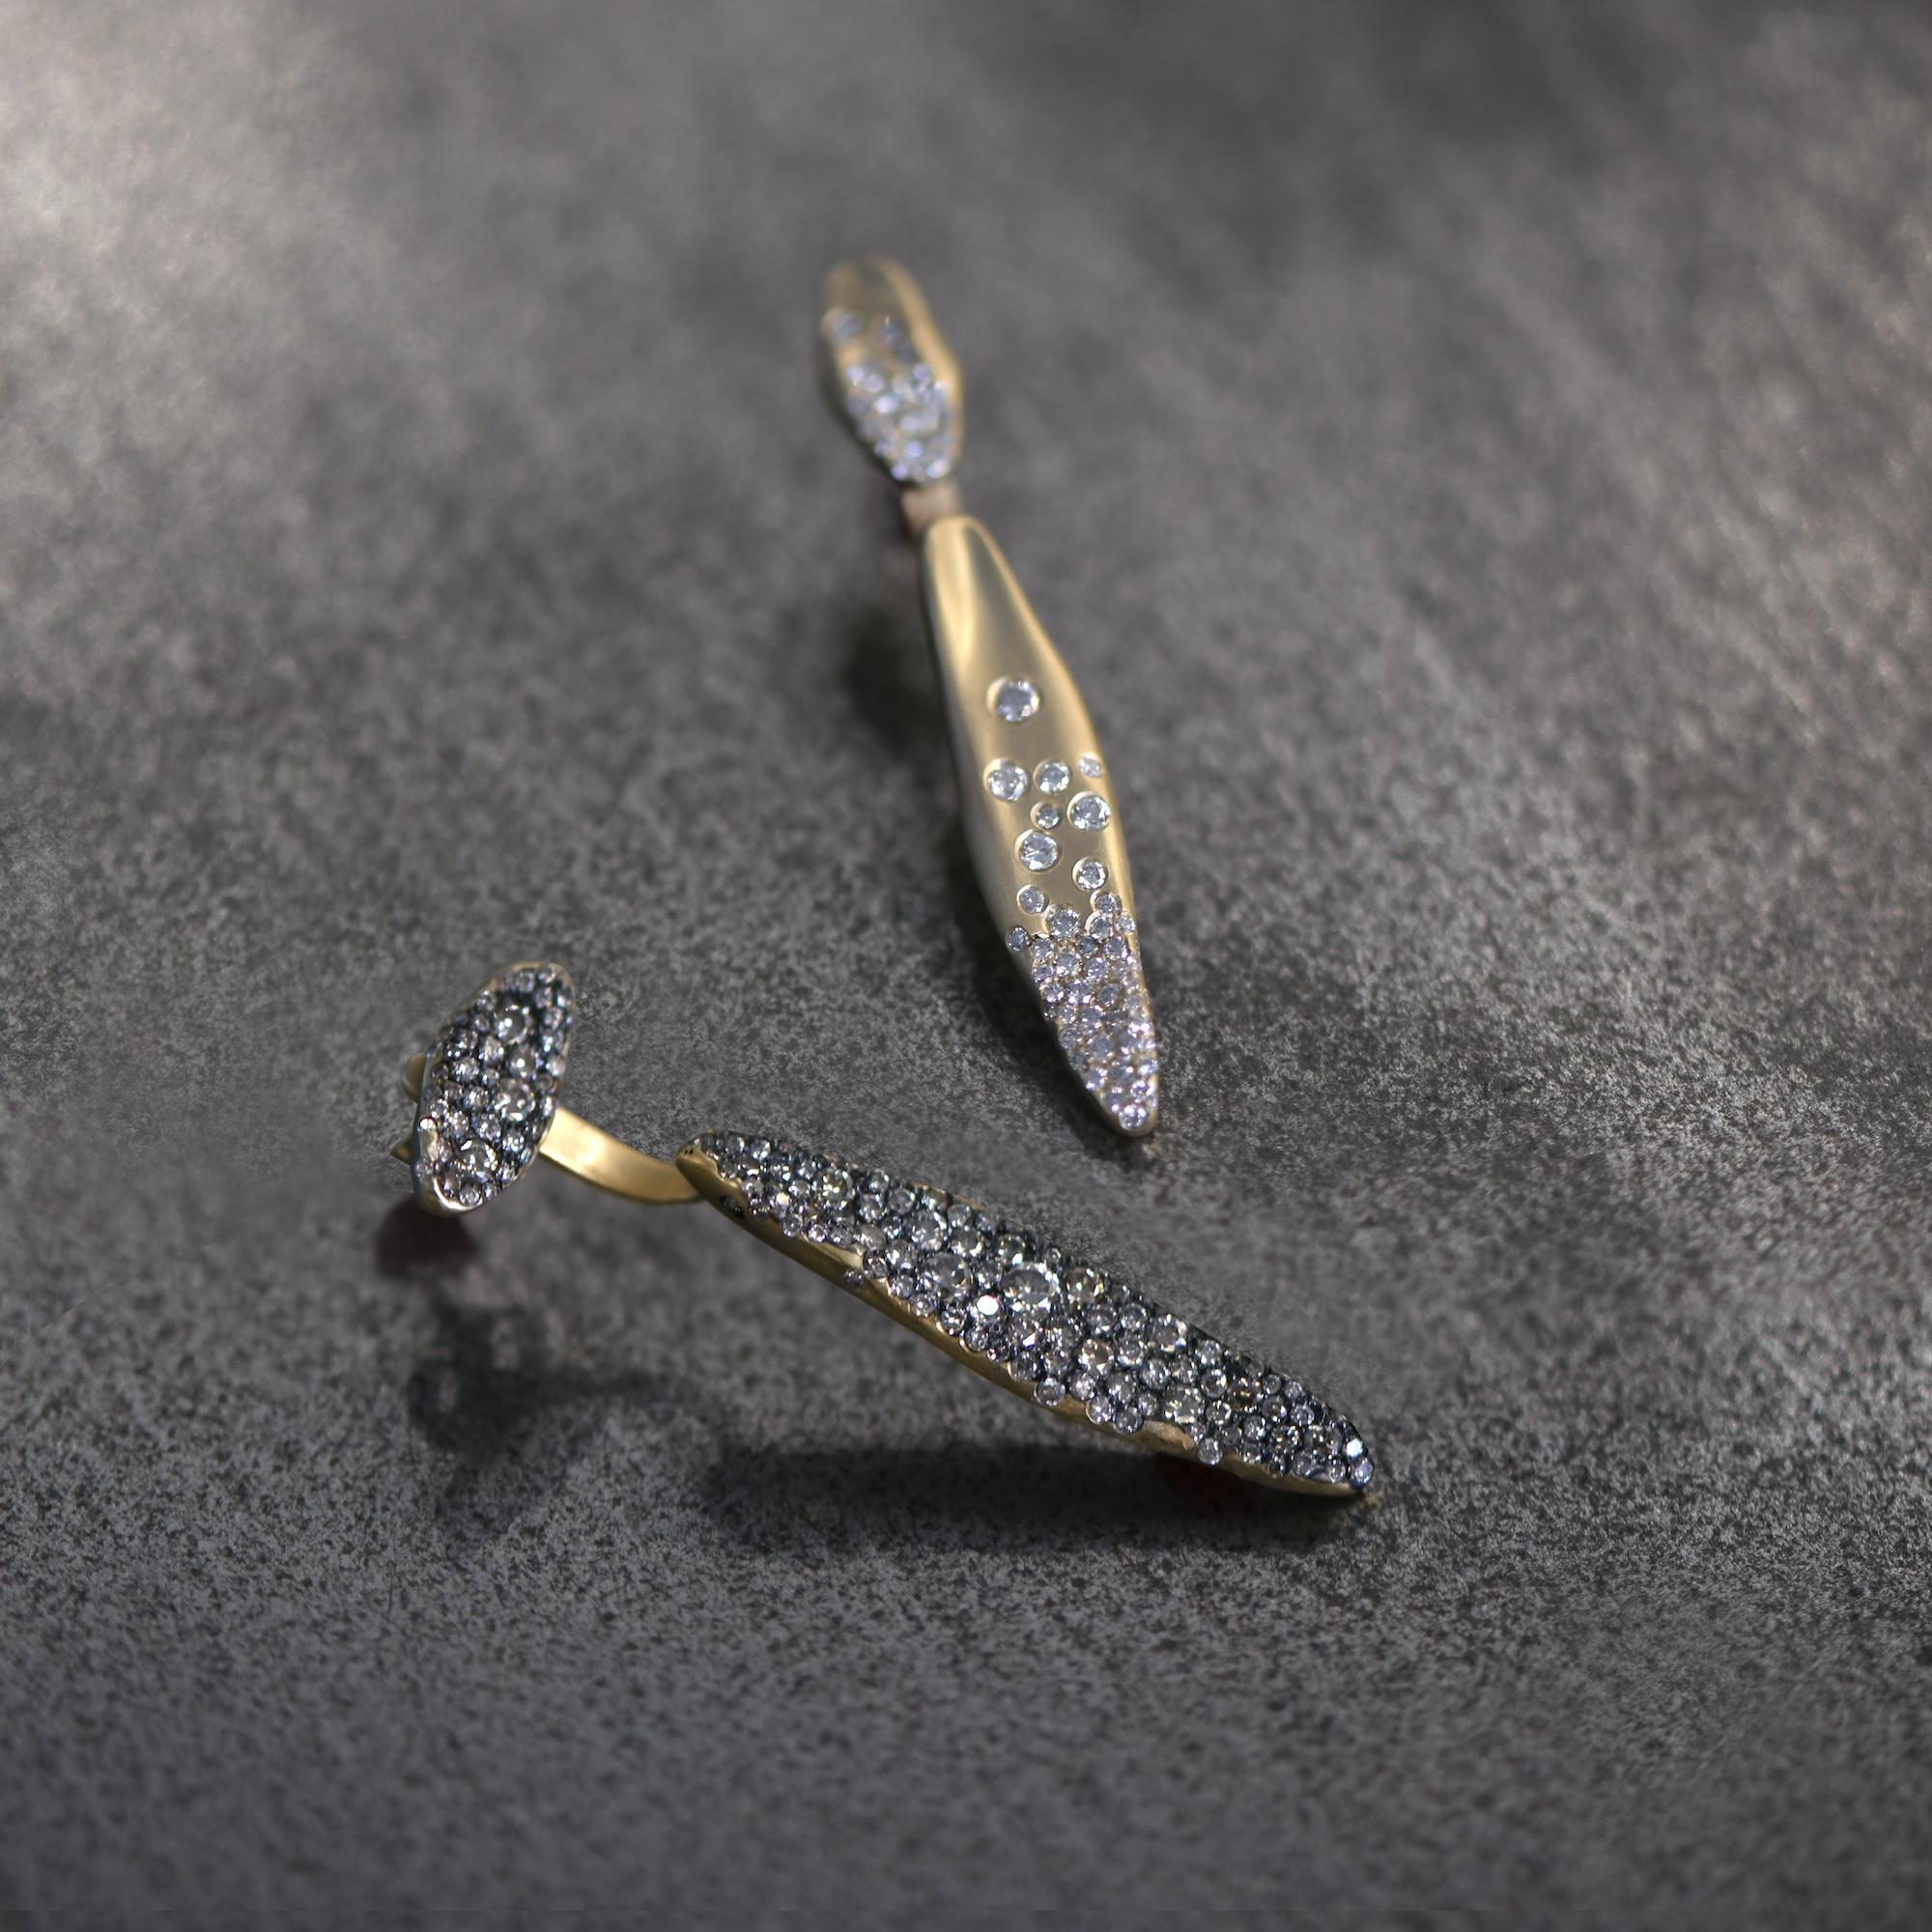 Baby Malak Flourish Earrings transform your look from day to night with a lobe piece and handing drop. The earring is handcrafted in 18K gold and studded with 3CT of champagne diamond. A rhodium finish makes the diamonds bubble like champagne